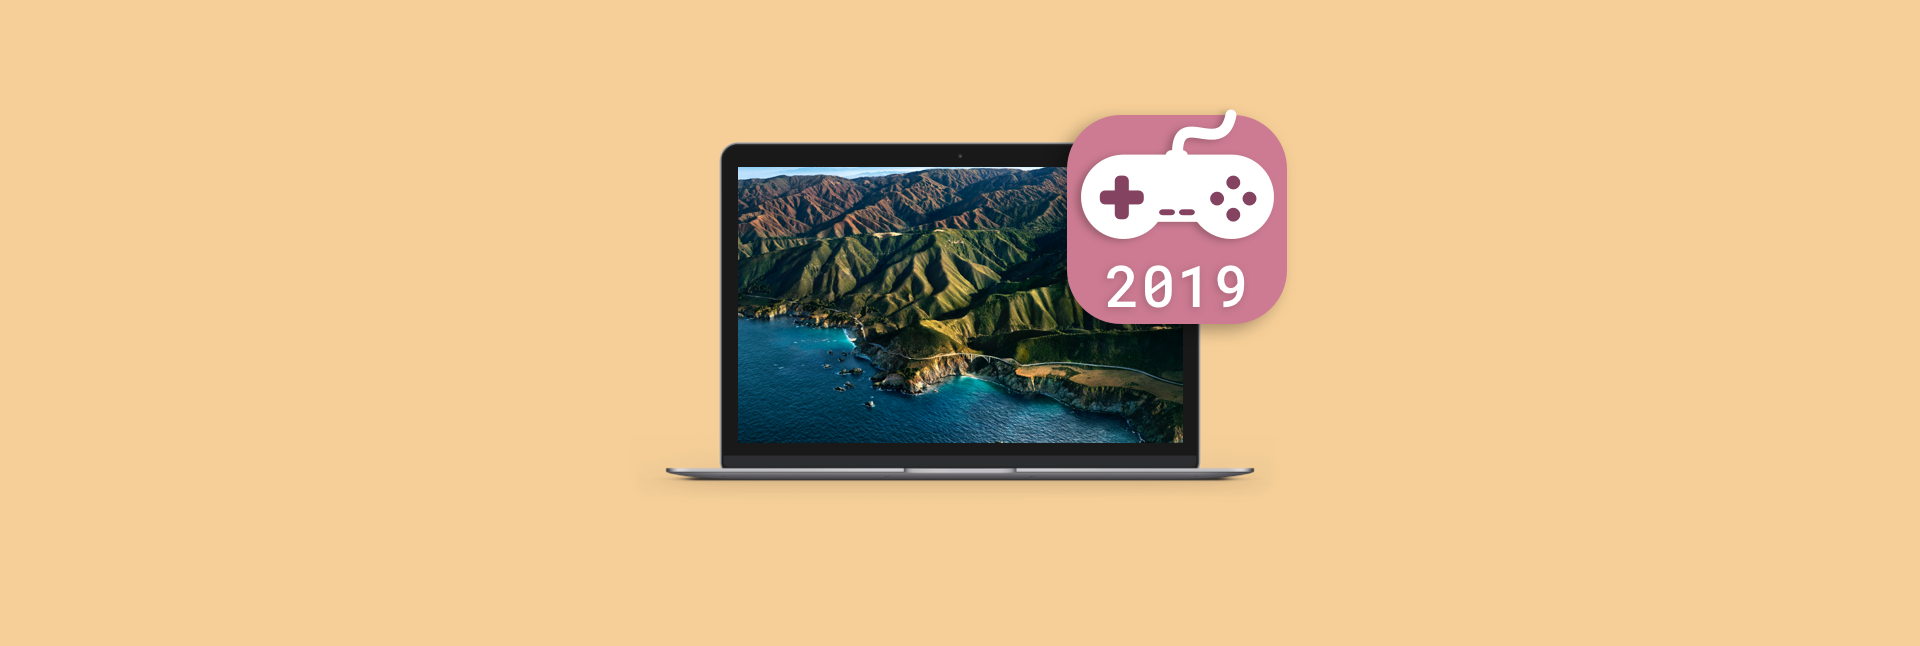 games for mac book pro